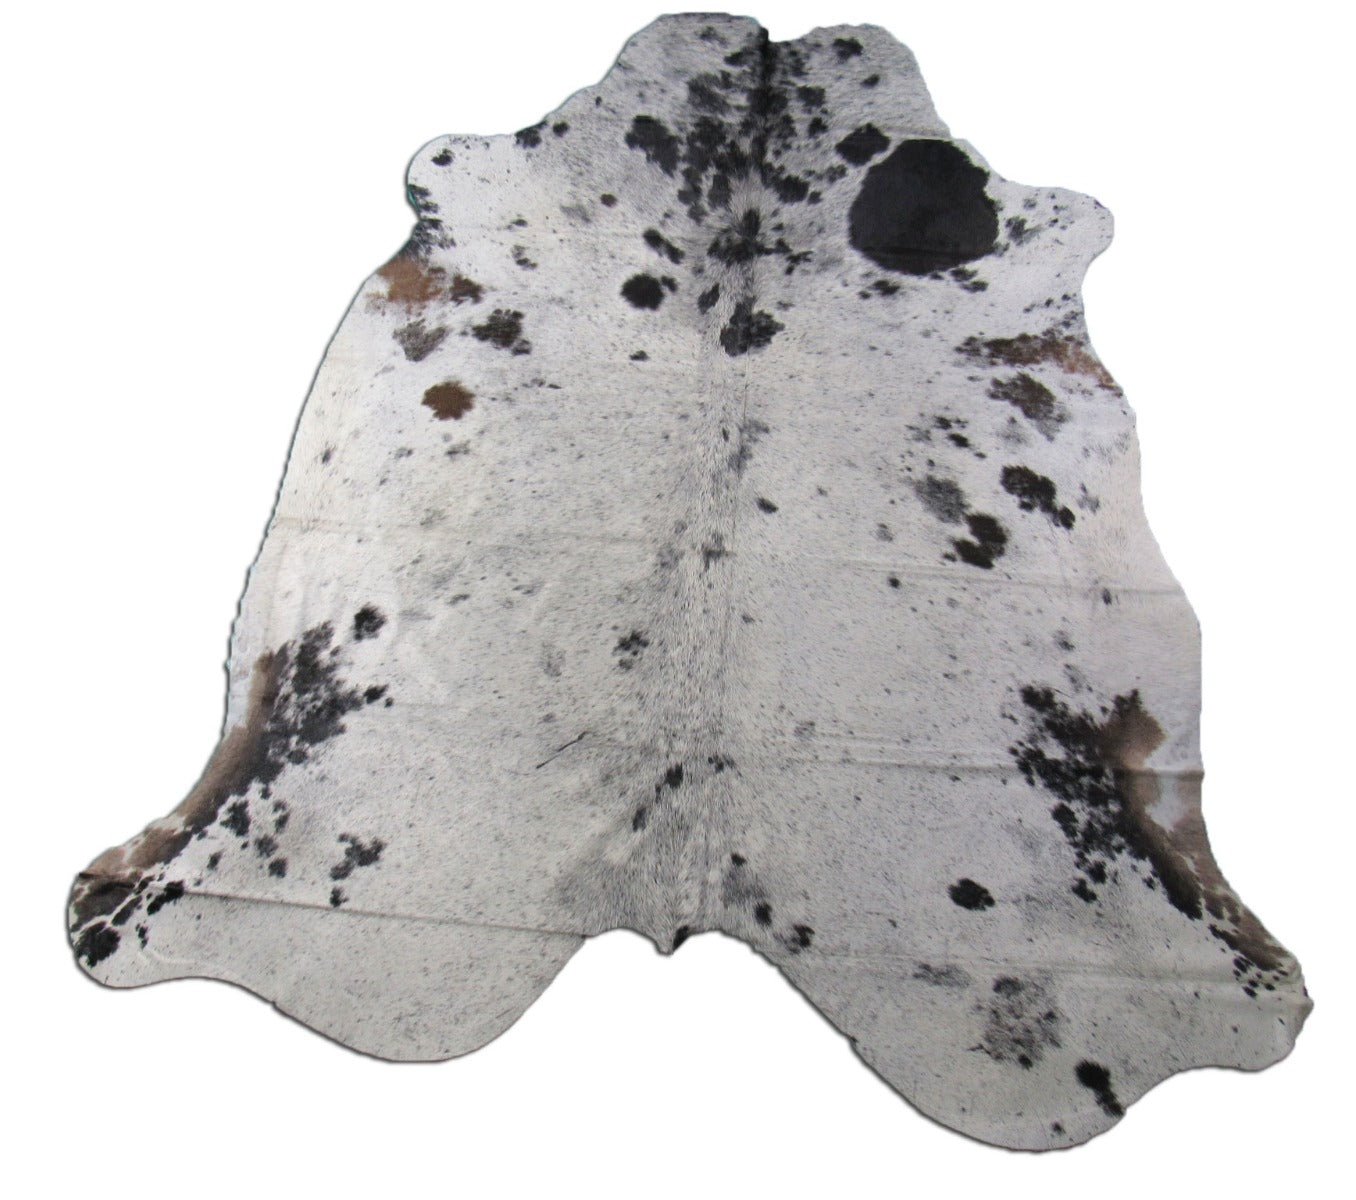 Salt & Pepper Black and White Cowhide Rug (some spots are brown/other black) - Size: 8x6.7 feet M-1263